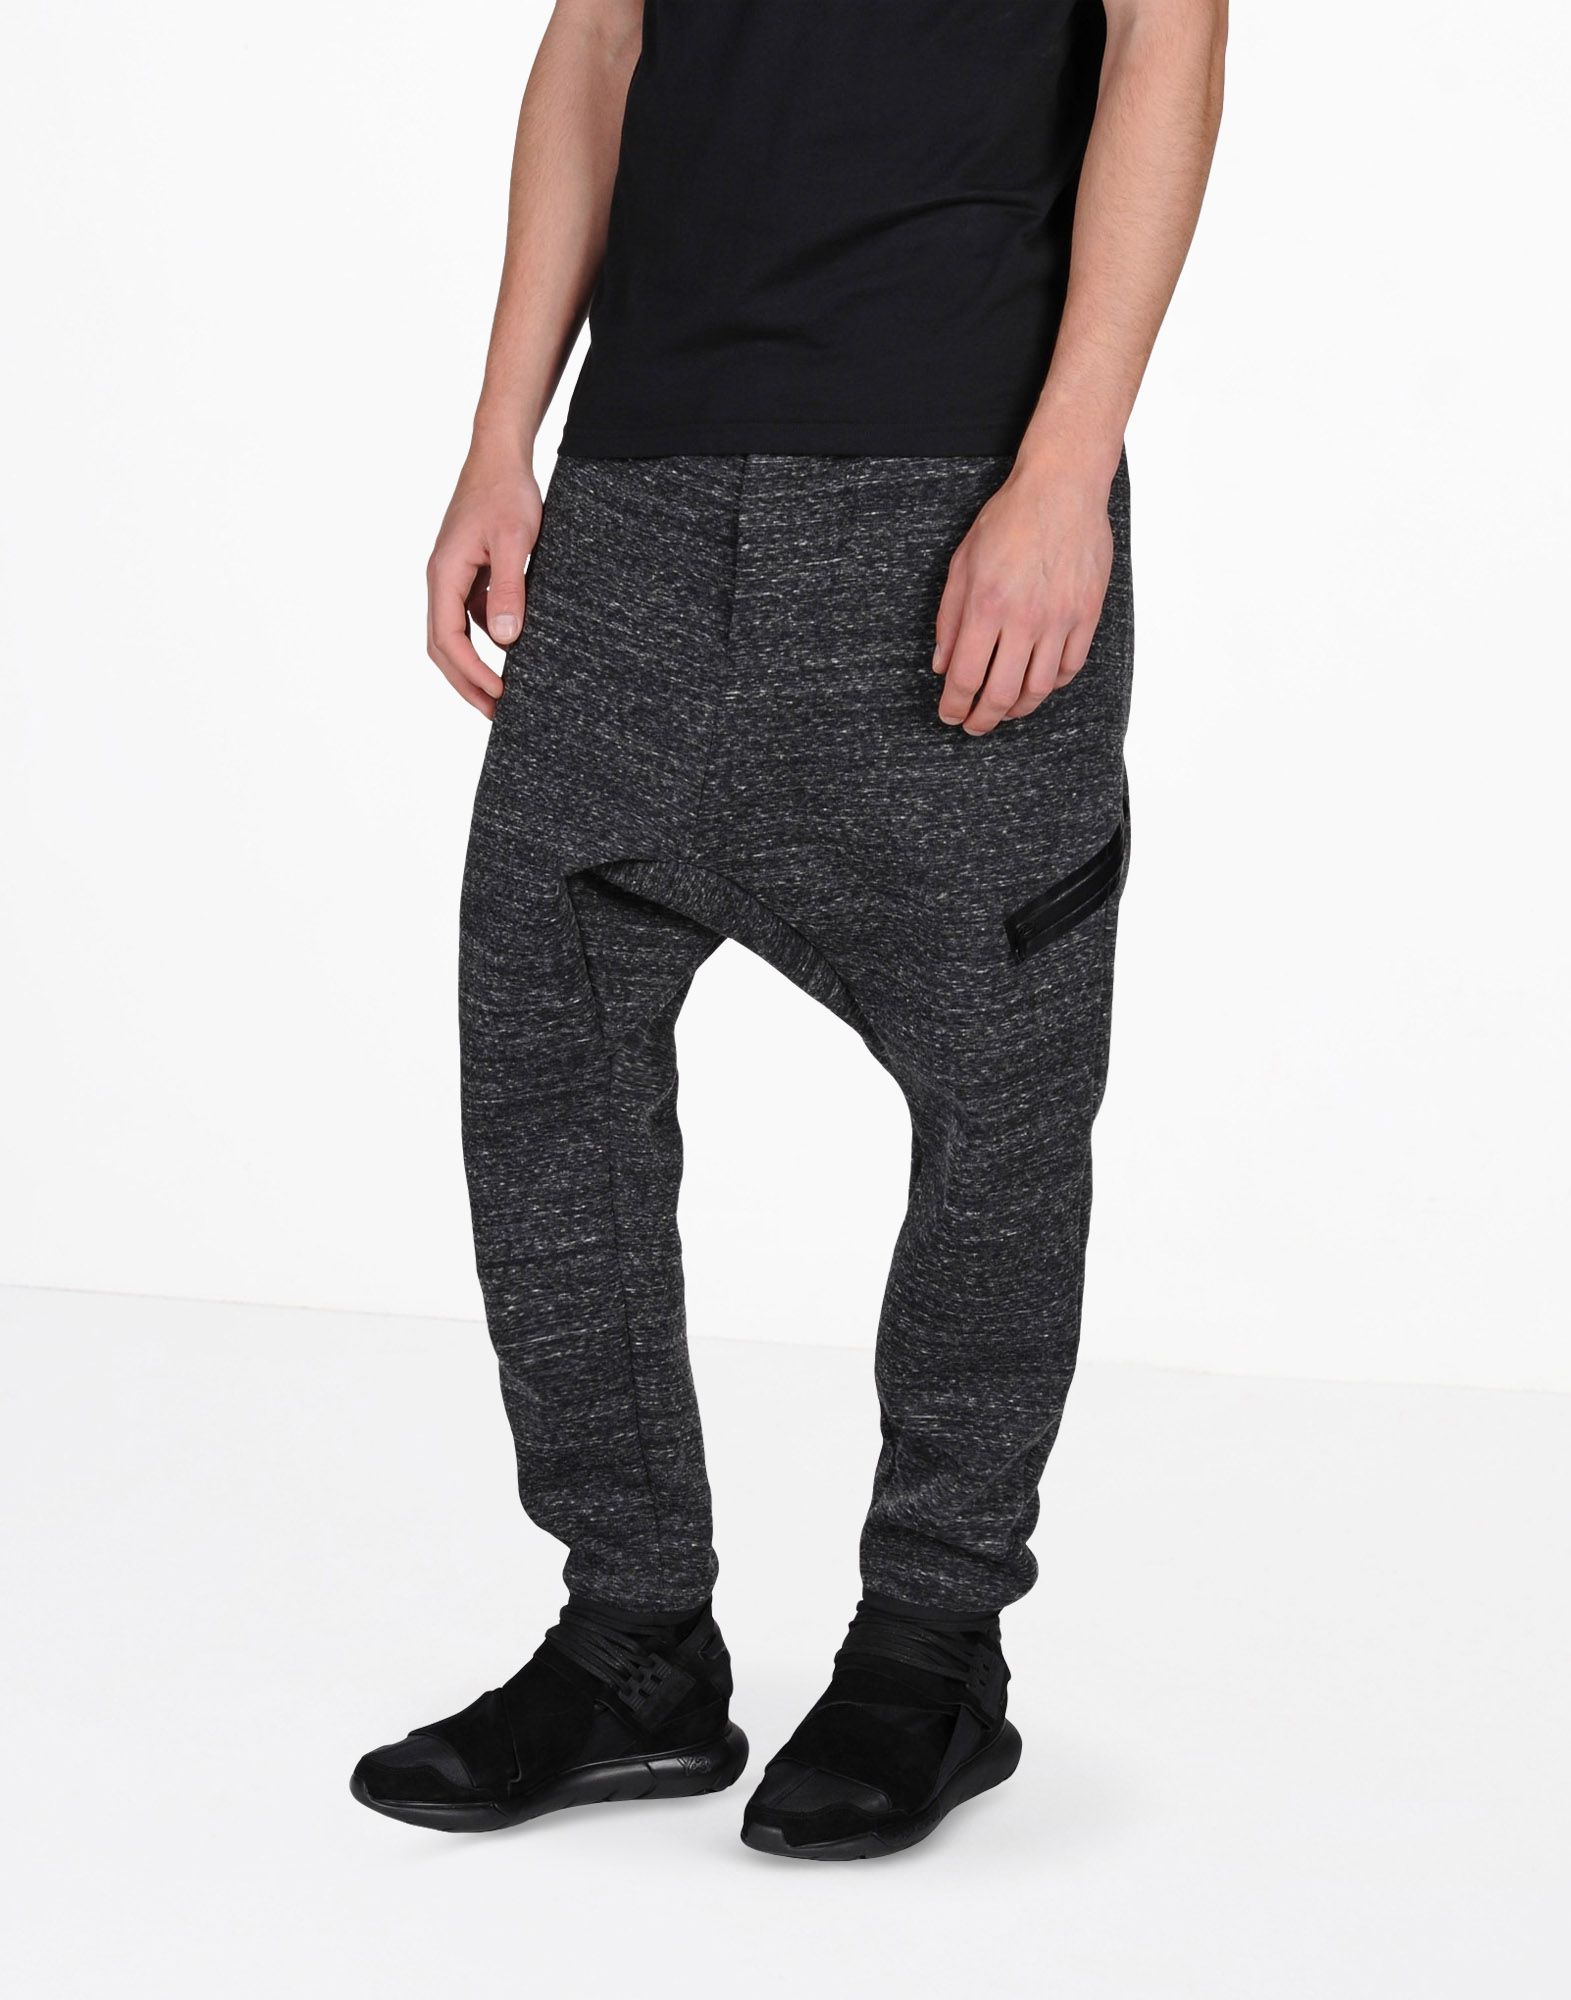 Y 3 FUTURE SPORT PANT for Men | Adidas Y-3 Official Store